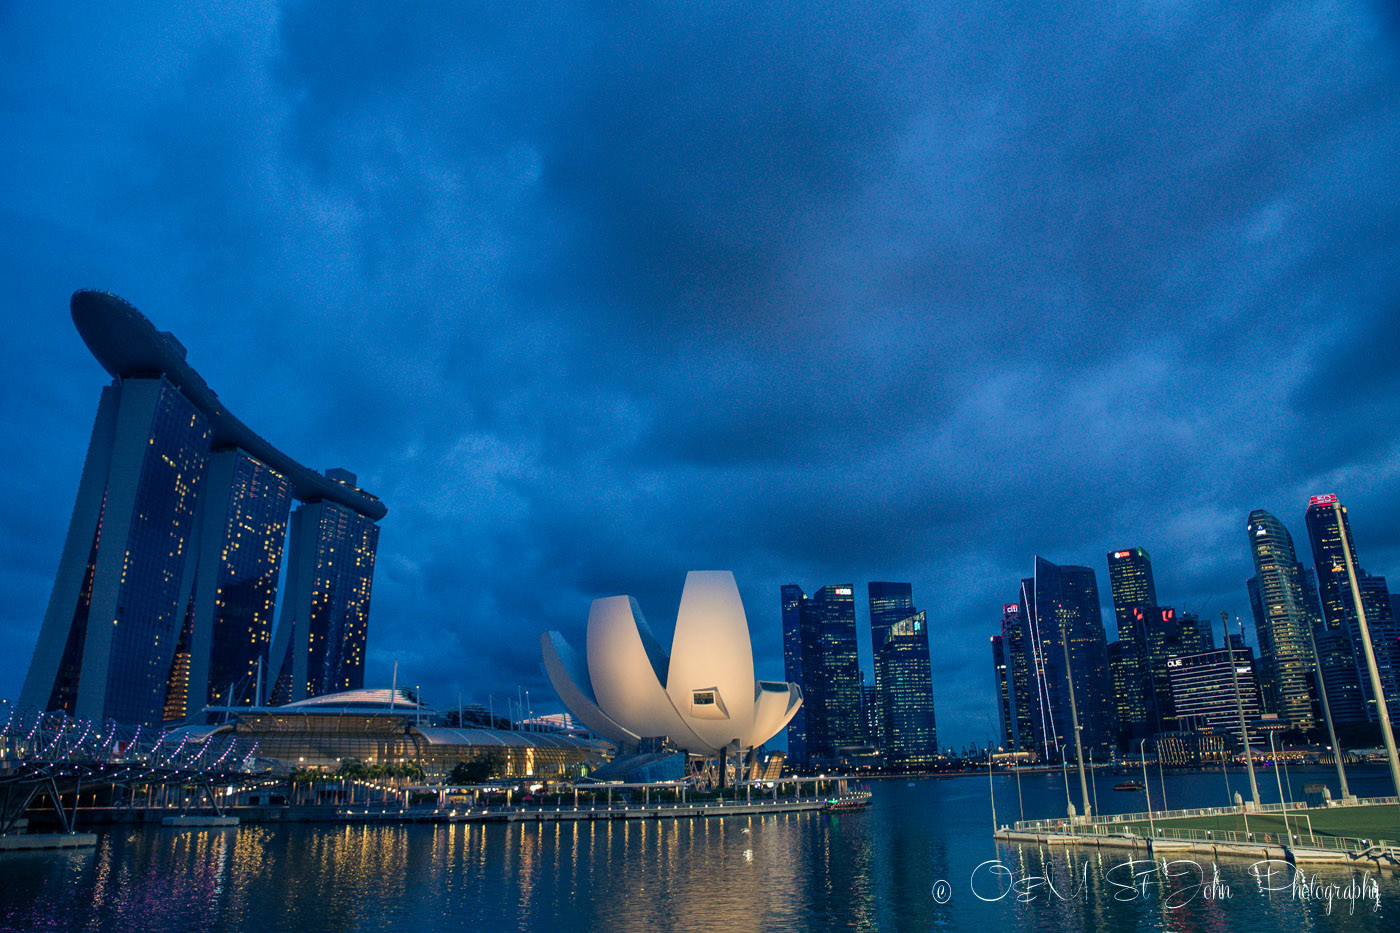 Singapore's Harbourfront. View from the Helix Bridge. Singapore on a budget 